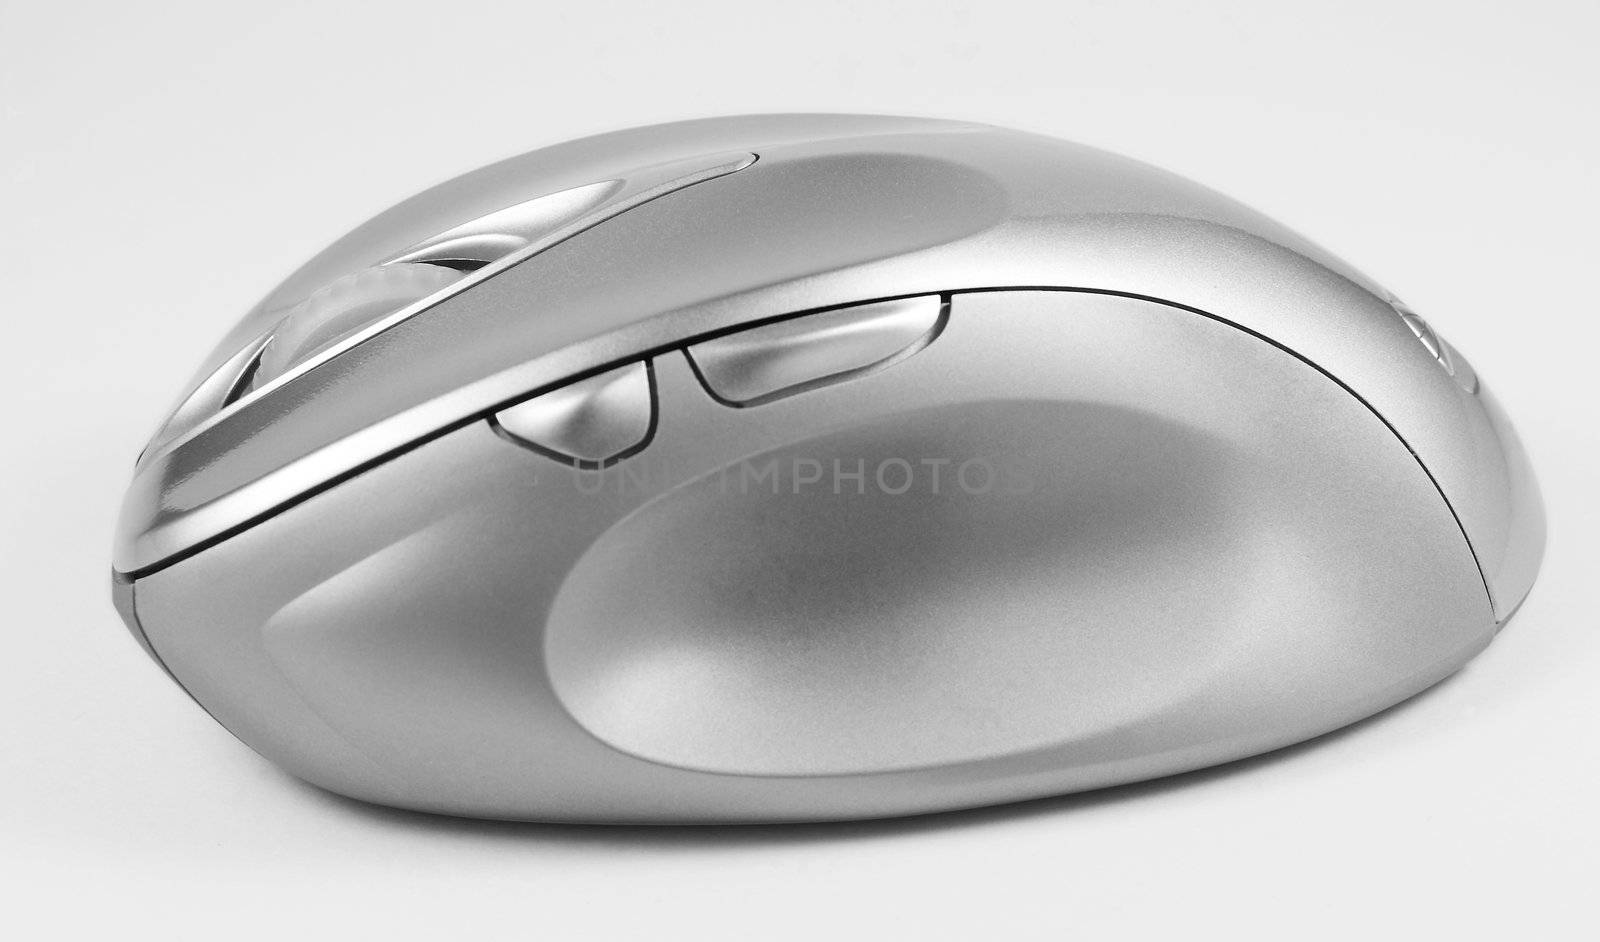 Black and white image of cordless optical mouse